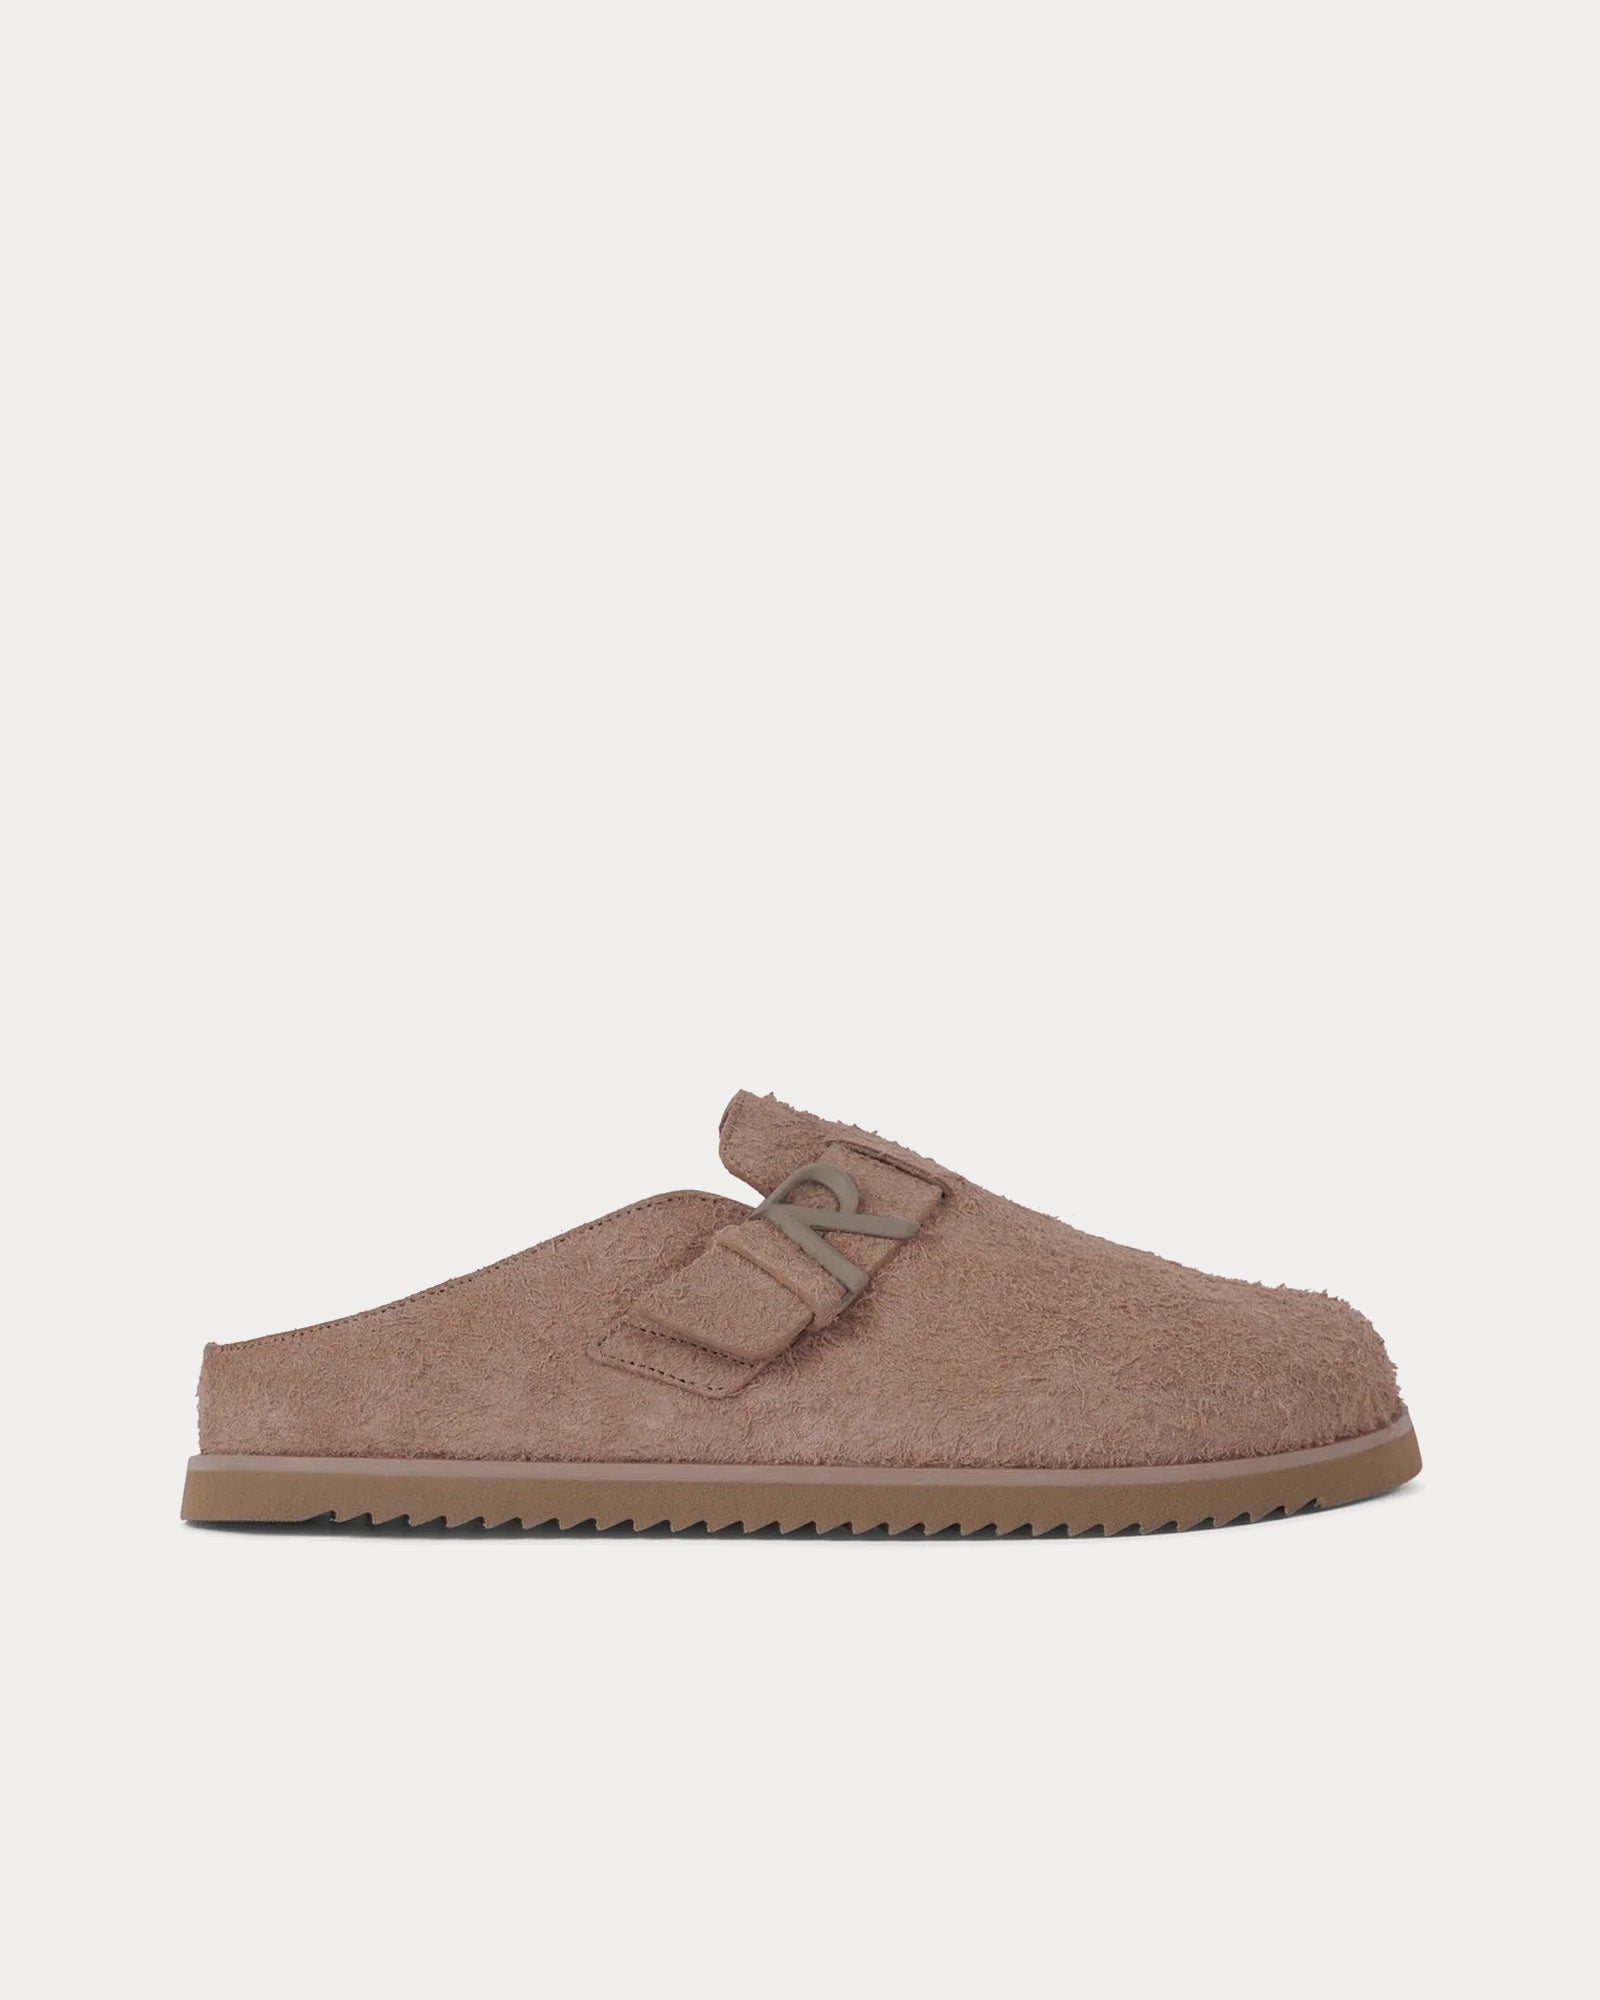 Represent - Initial Hairy Suede Brown Mules